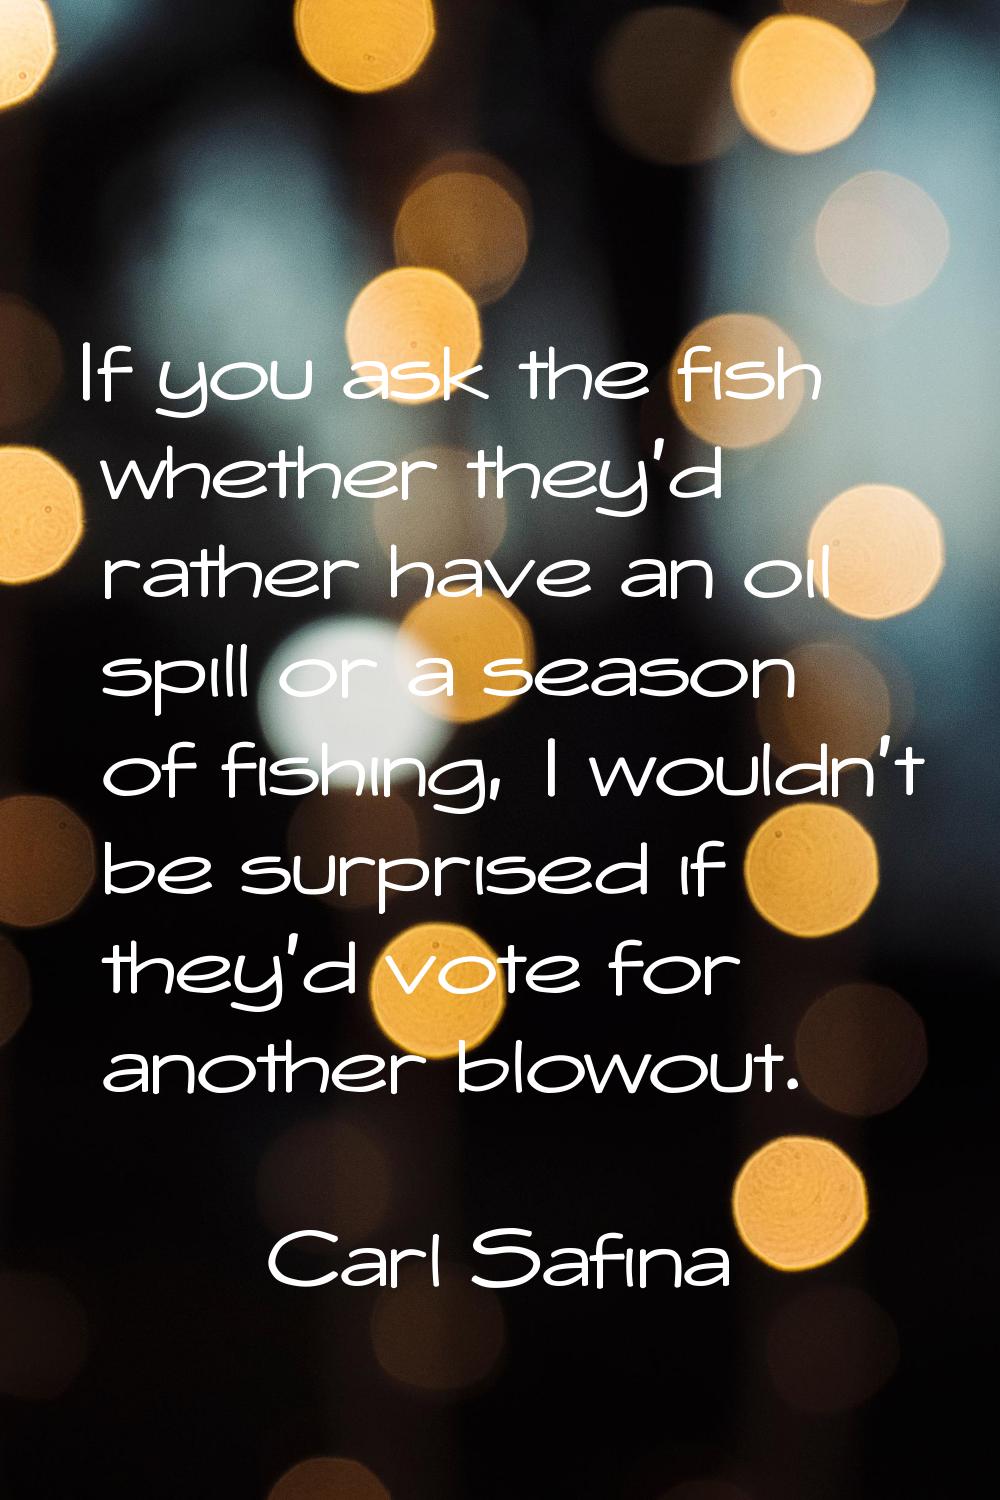 If you ask the fish whether they'd rather have an oil spill or a season of fishing, I wouldn't be s